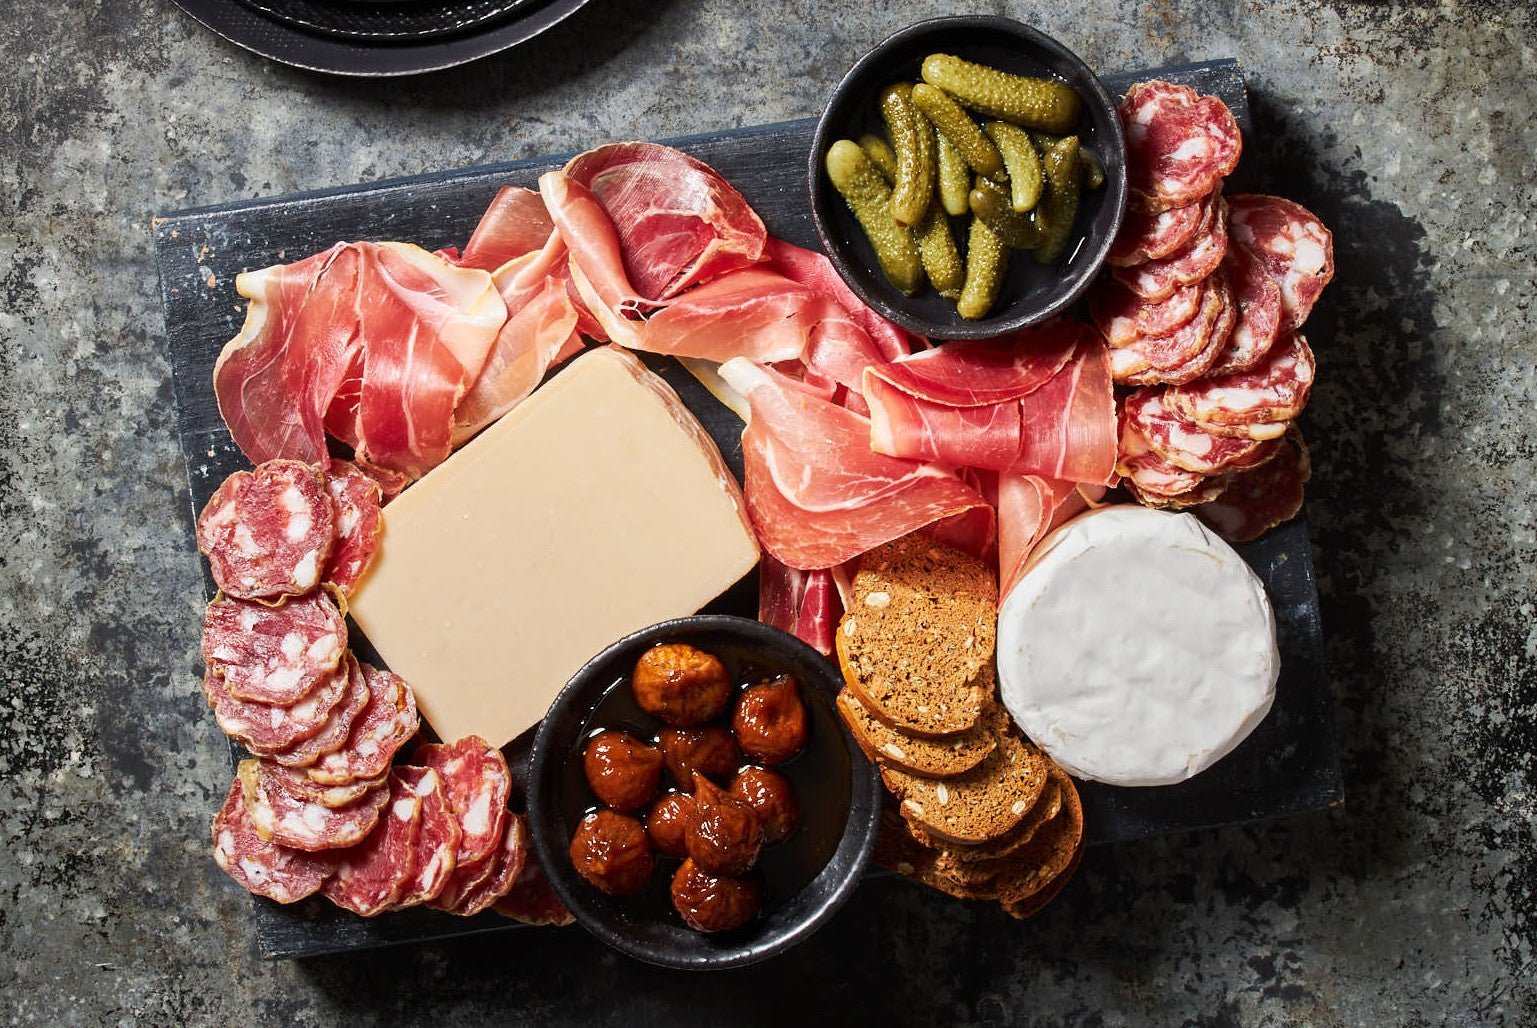 How to build the perfect picnic charcuterie pack